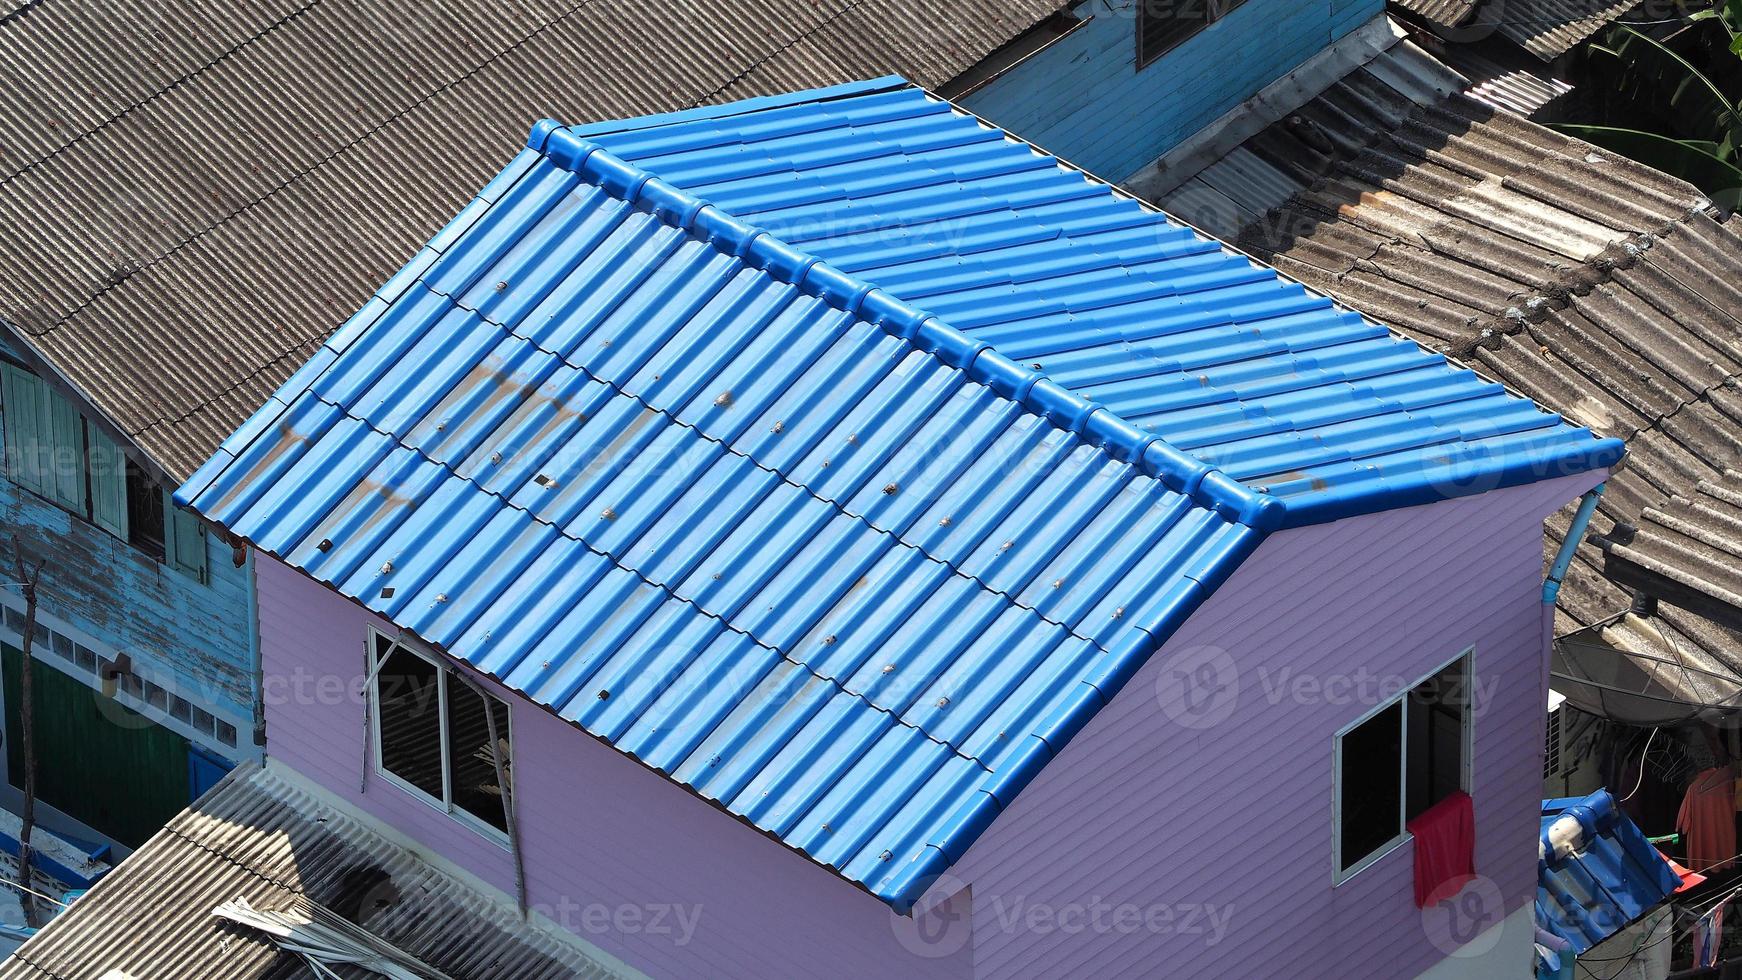 Roof tiles and made from ceramic and metal material and top view angle. photo